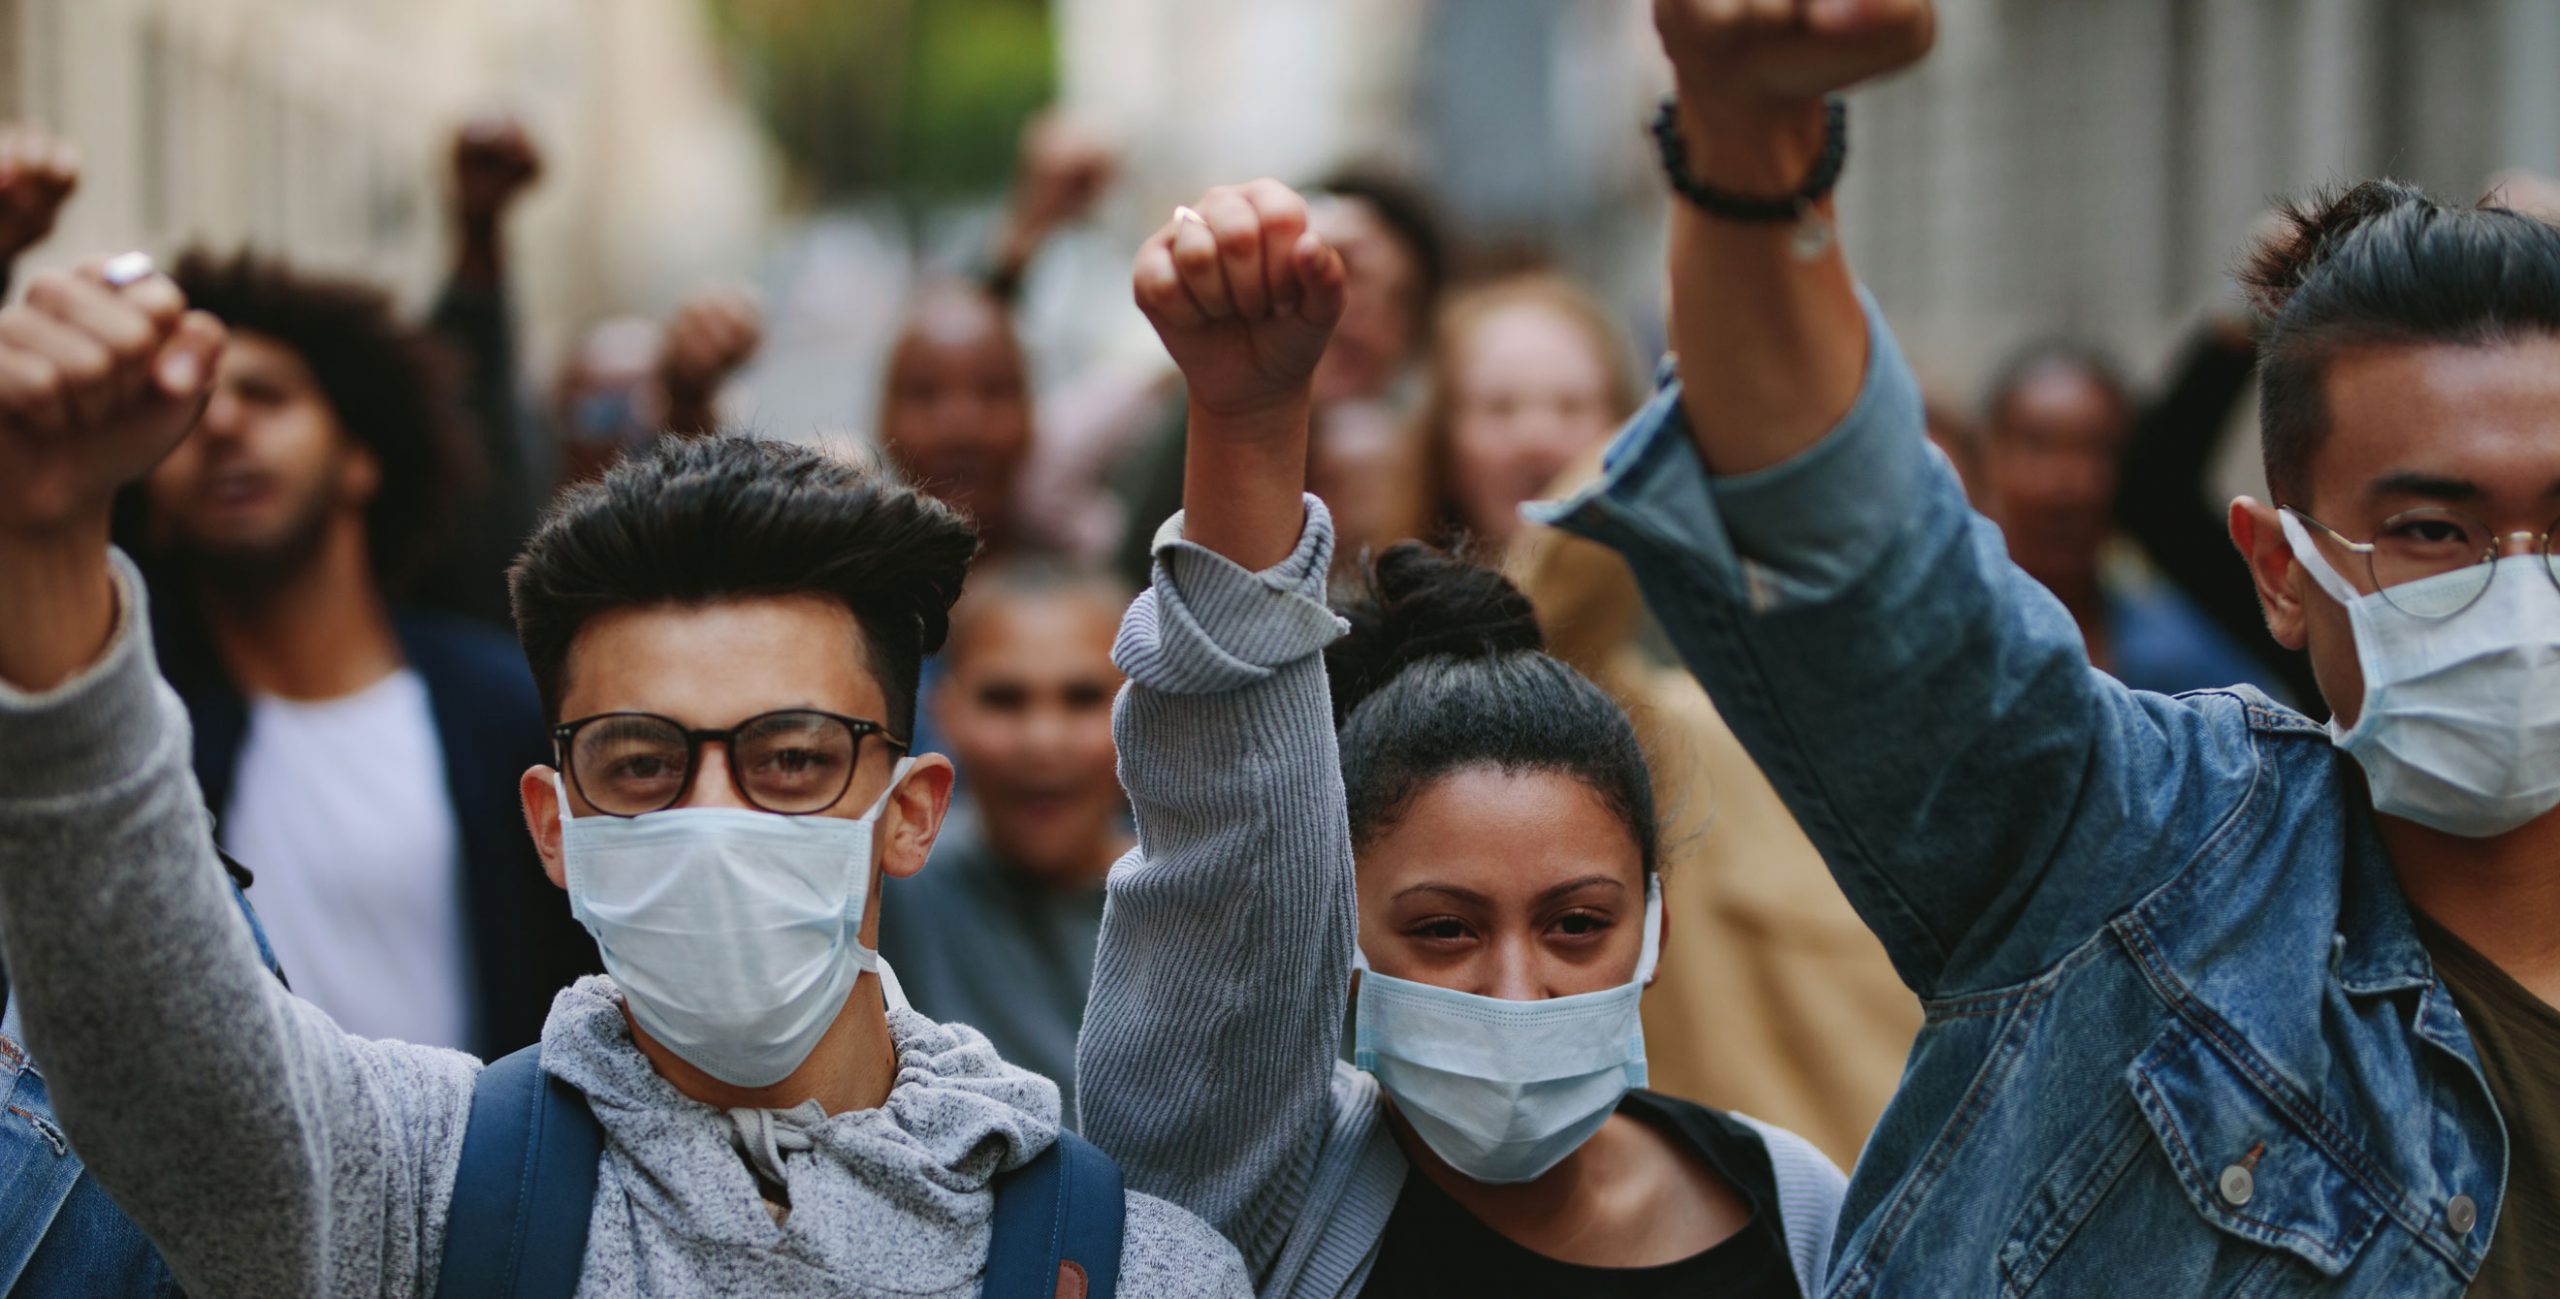 Colorado's Division of Insurance has published a proposed bulletin clarifying that health insurers cannot use riot exclusions to deny coverage to members who are injured during protests.